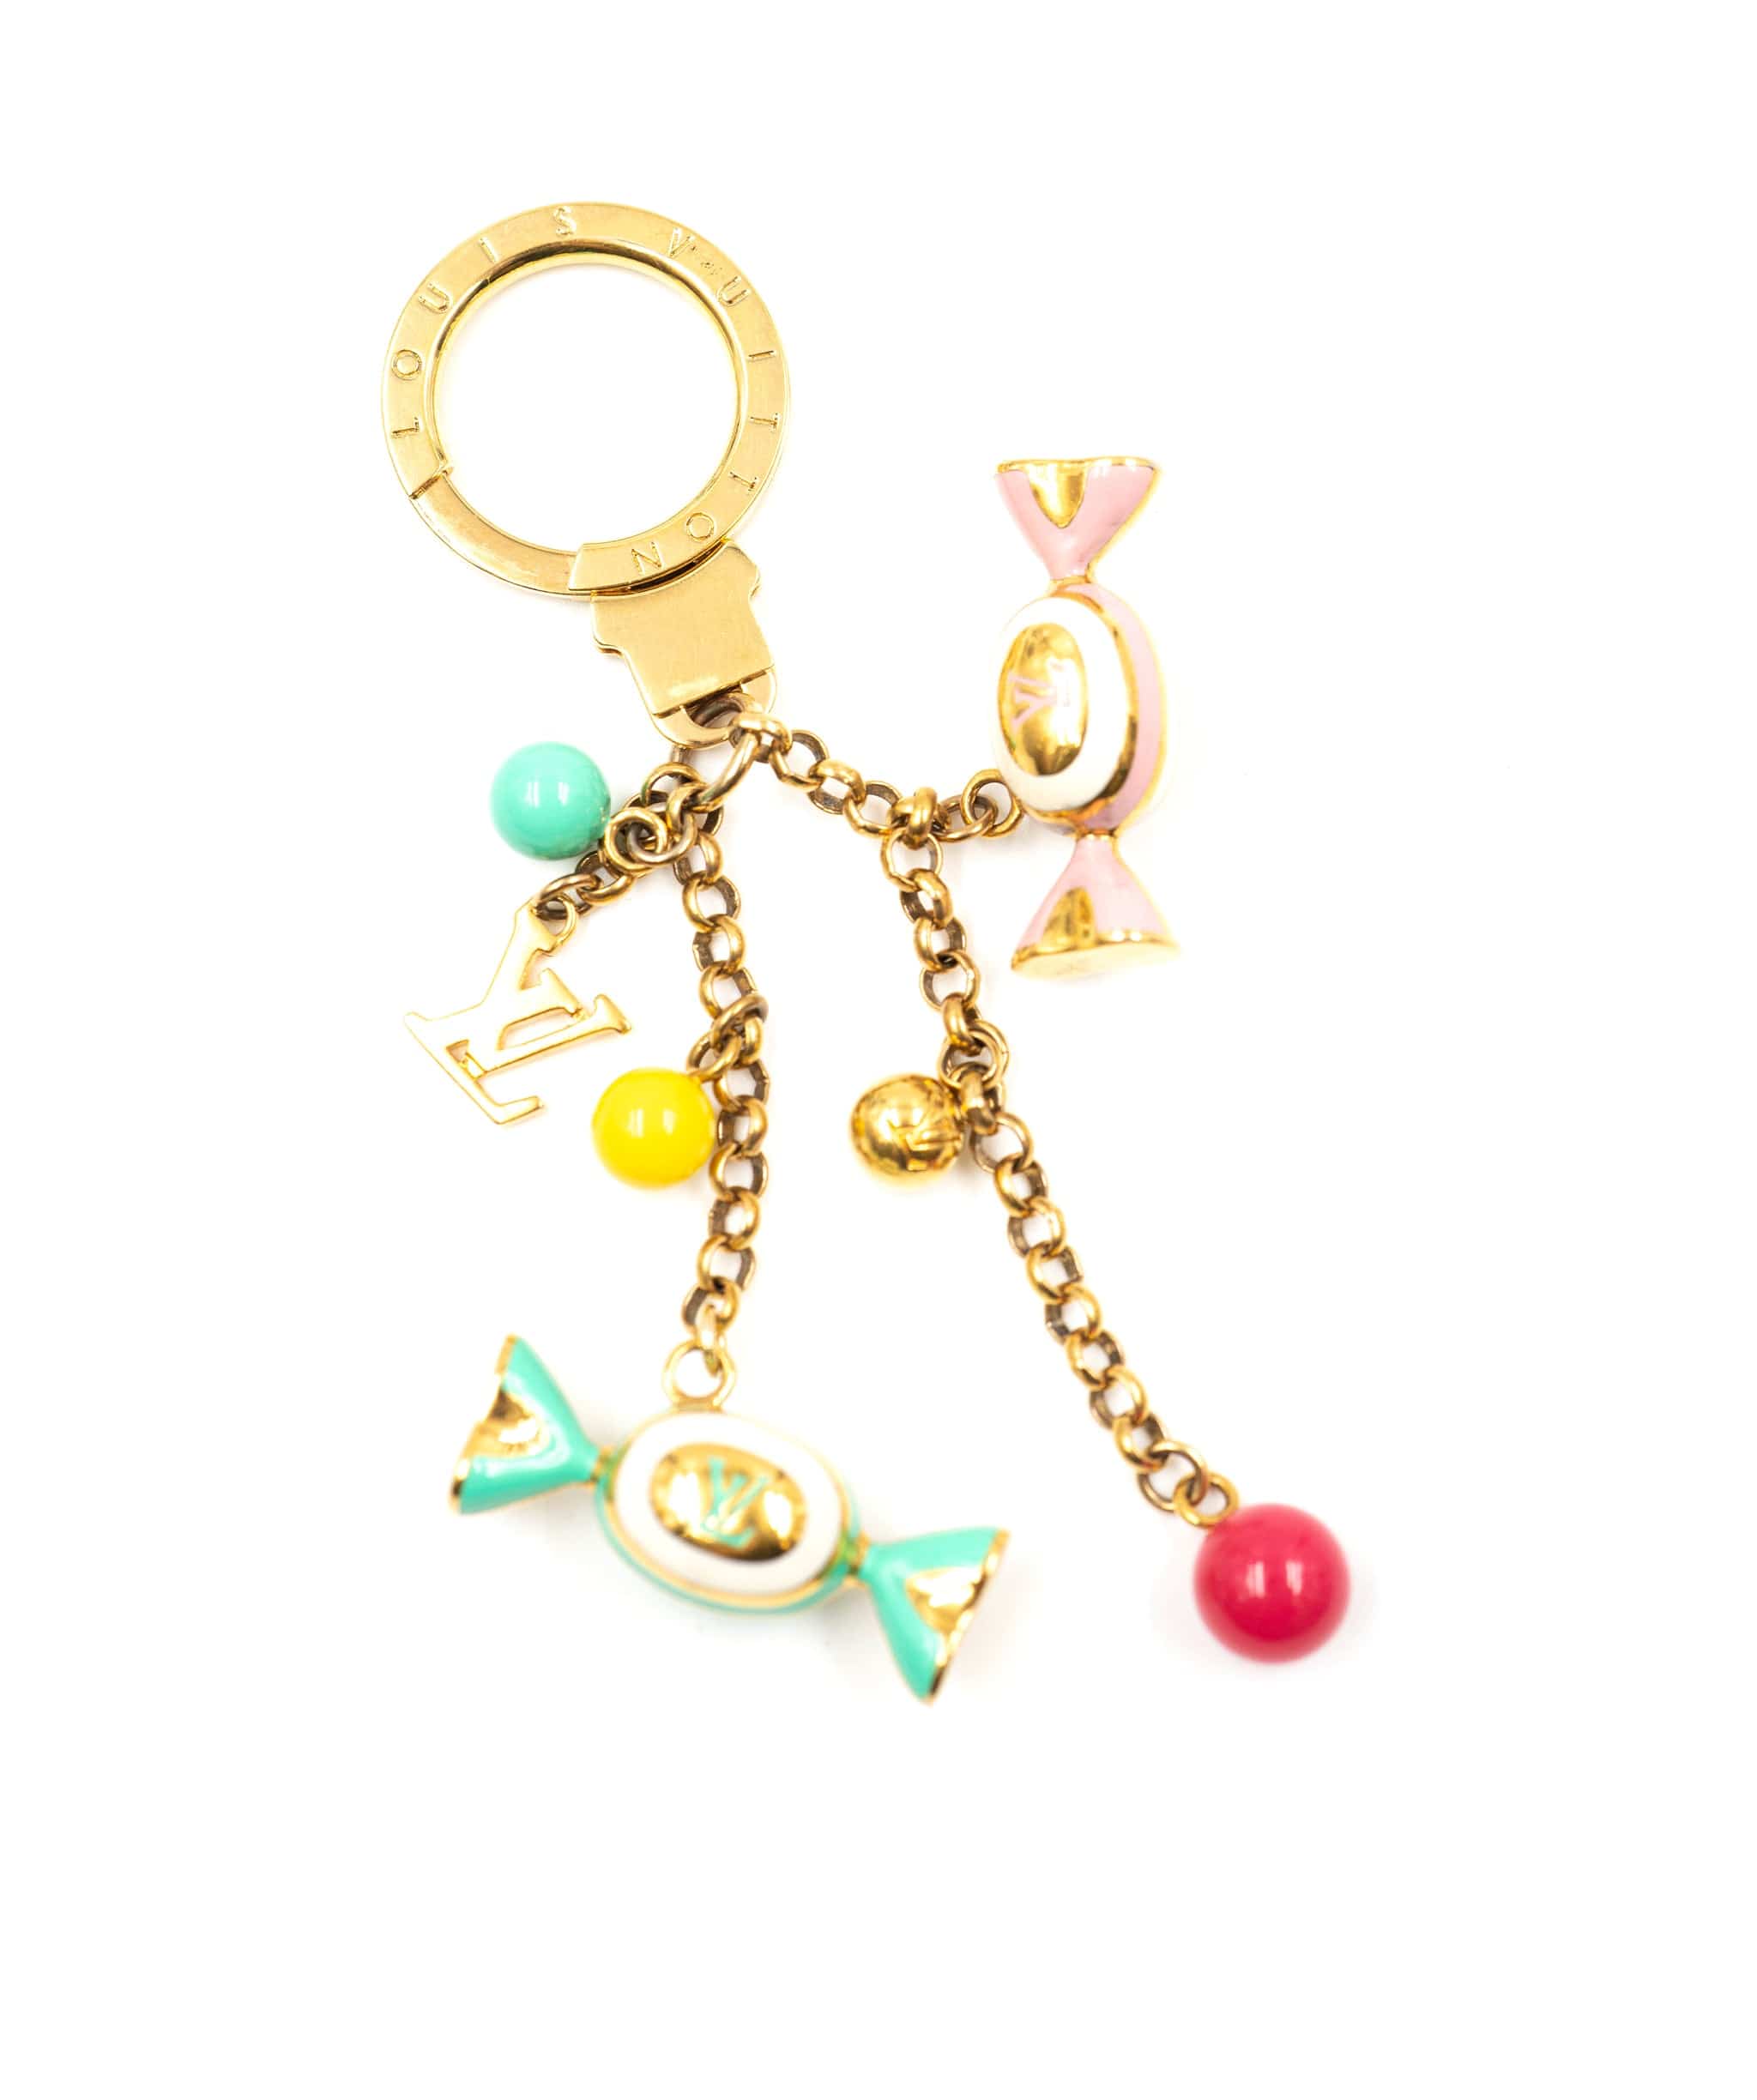 Louis Vuitton LOUIS VUITTON Porte Cles Delice Candy Key Holder and Bag Charm - AWL3495